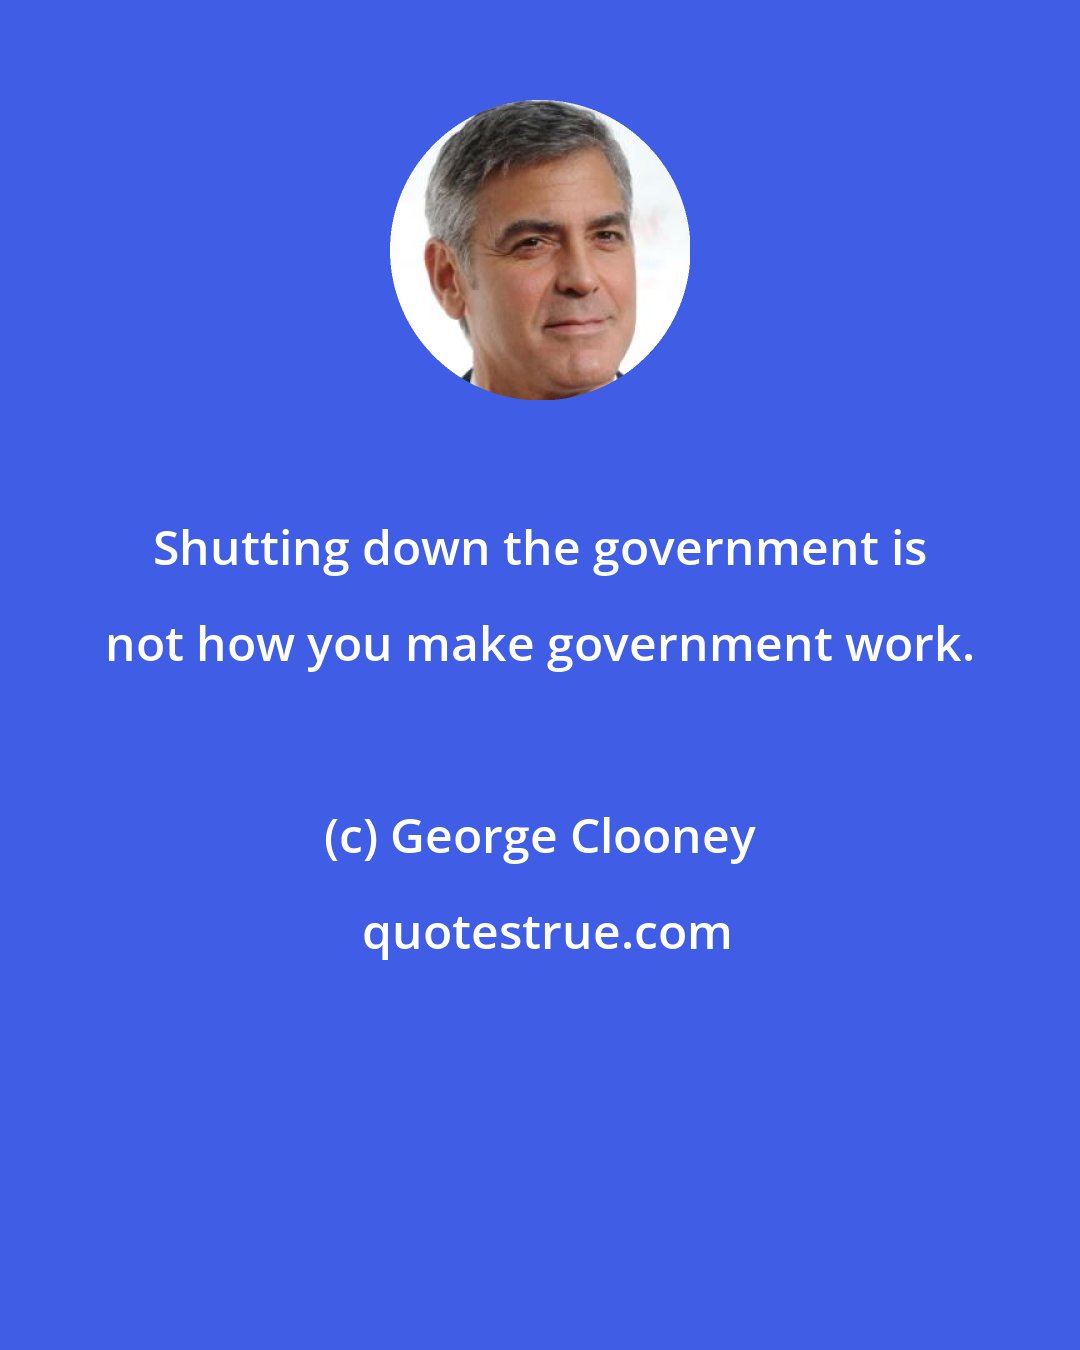 George Clooney: Shutting down the government is not how you make government work.